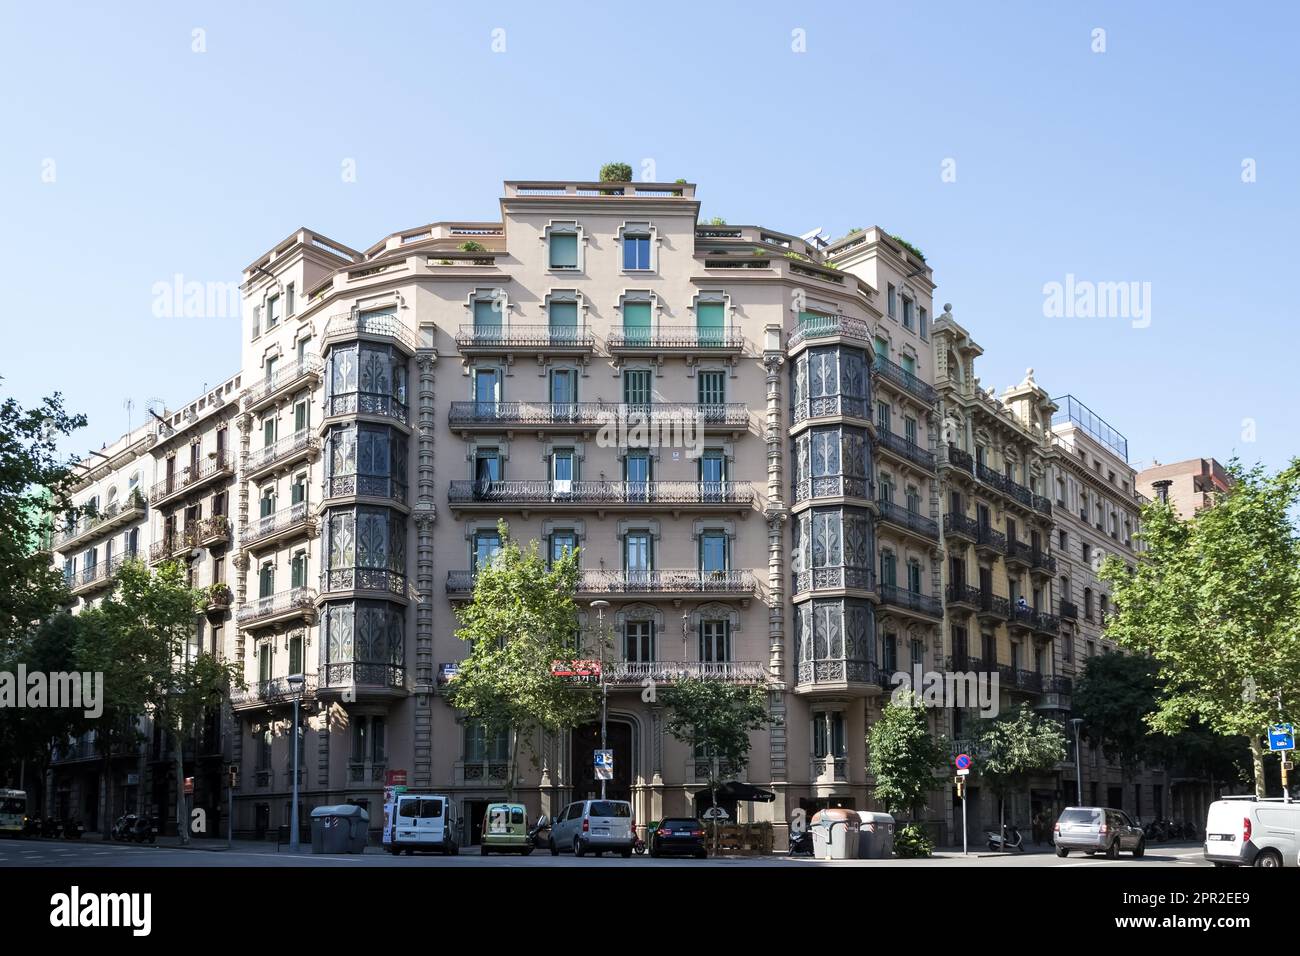 Casa Jaume Forn located in the Quadrat d'Or district, central Barcelona Stock Photo